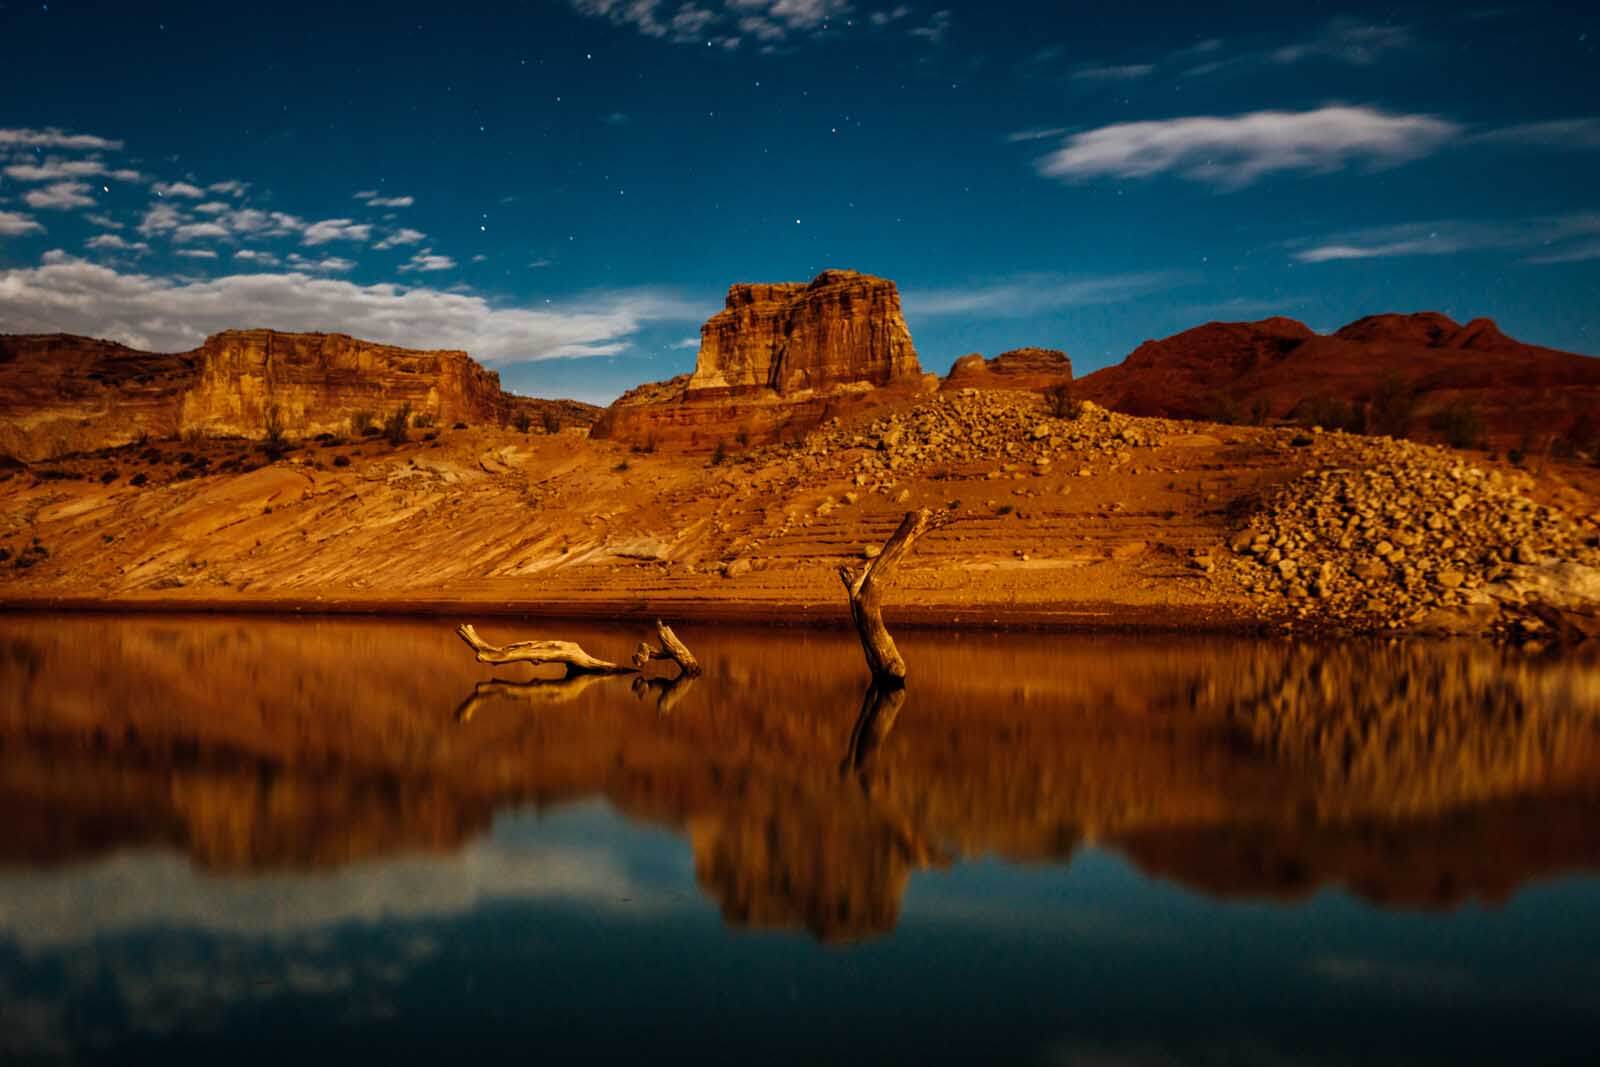 Lake Powell view on a full moon night